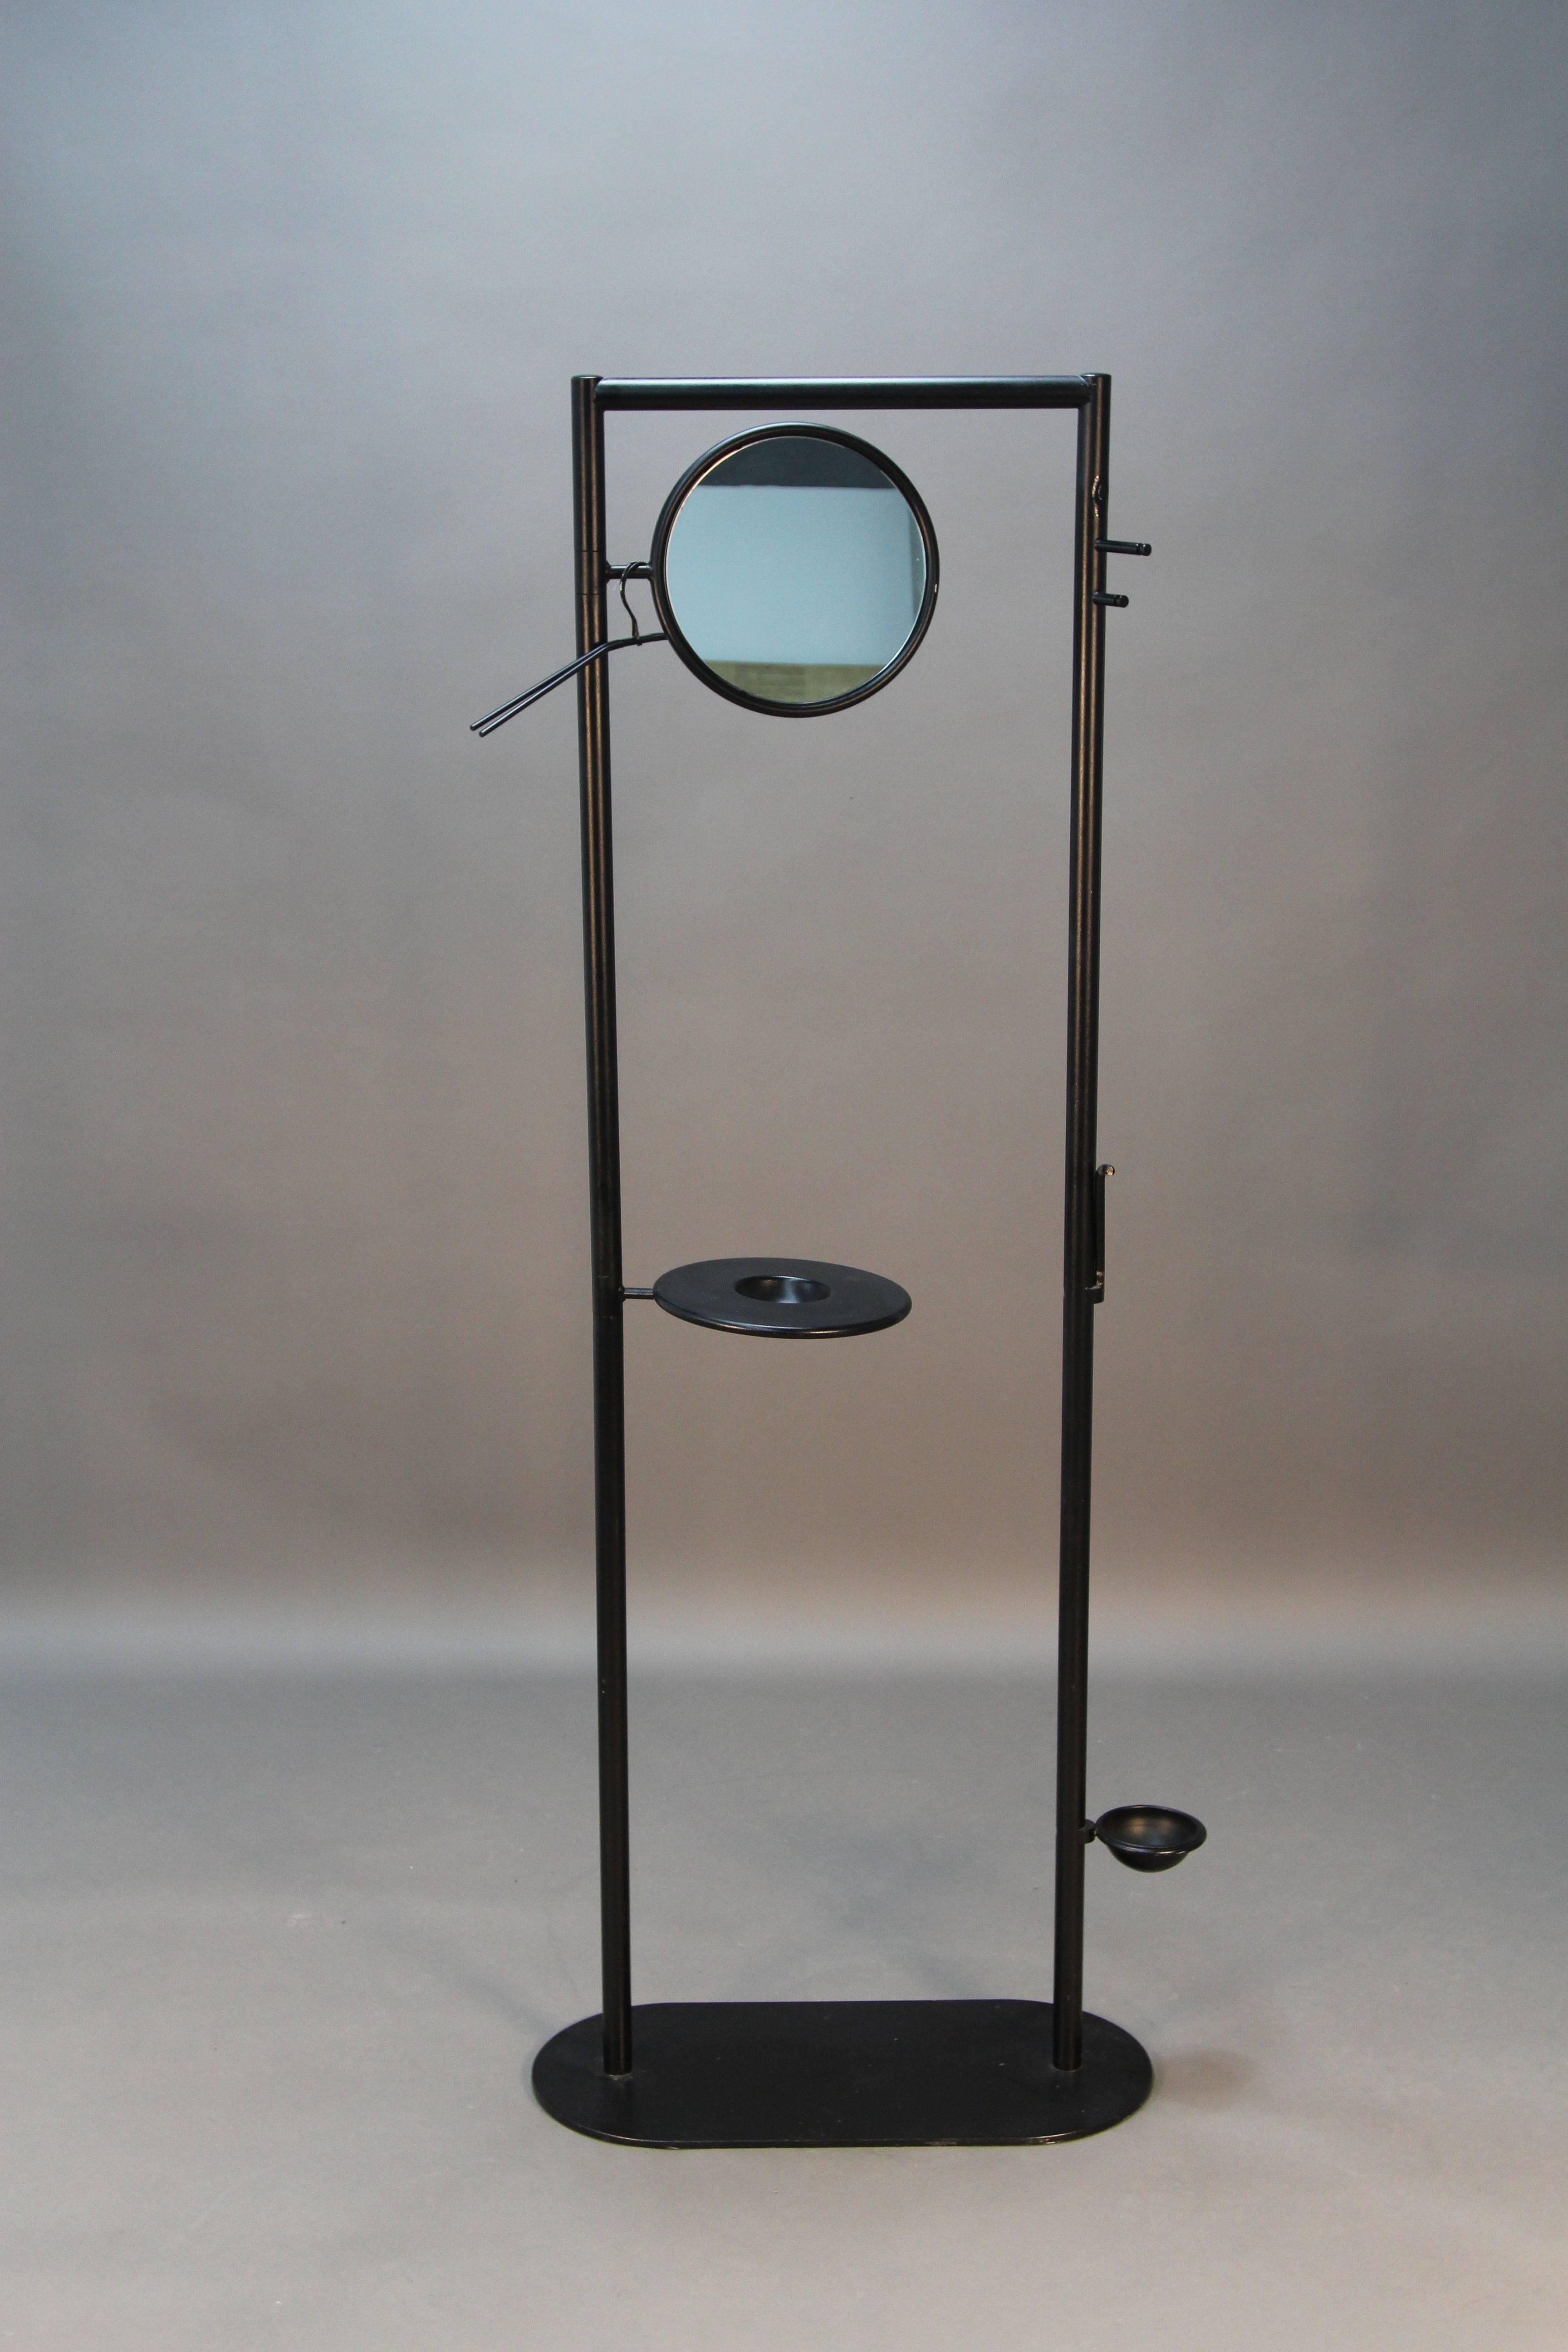 Designer coatrack from Fly Line in Carre Italy with swivel mirror, change or key cup, and swivel umbrella receiver.